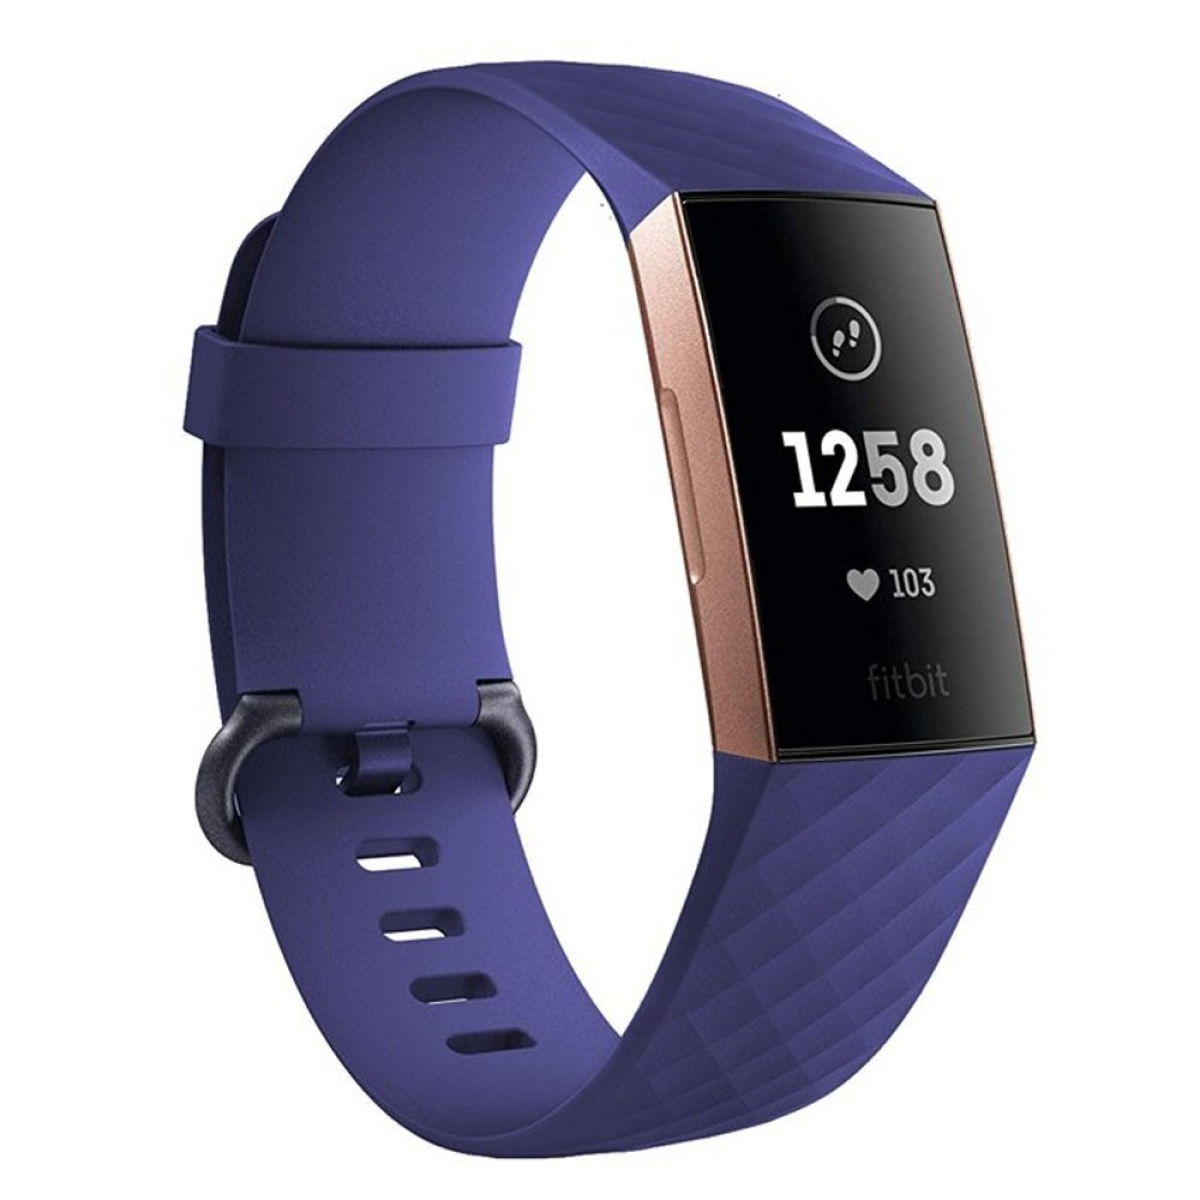 Silikon, Fitbit, Multicolor Smartband, 3, Fitbit Charge CASEONLINE